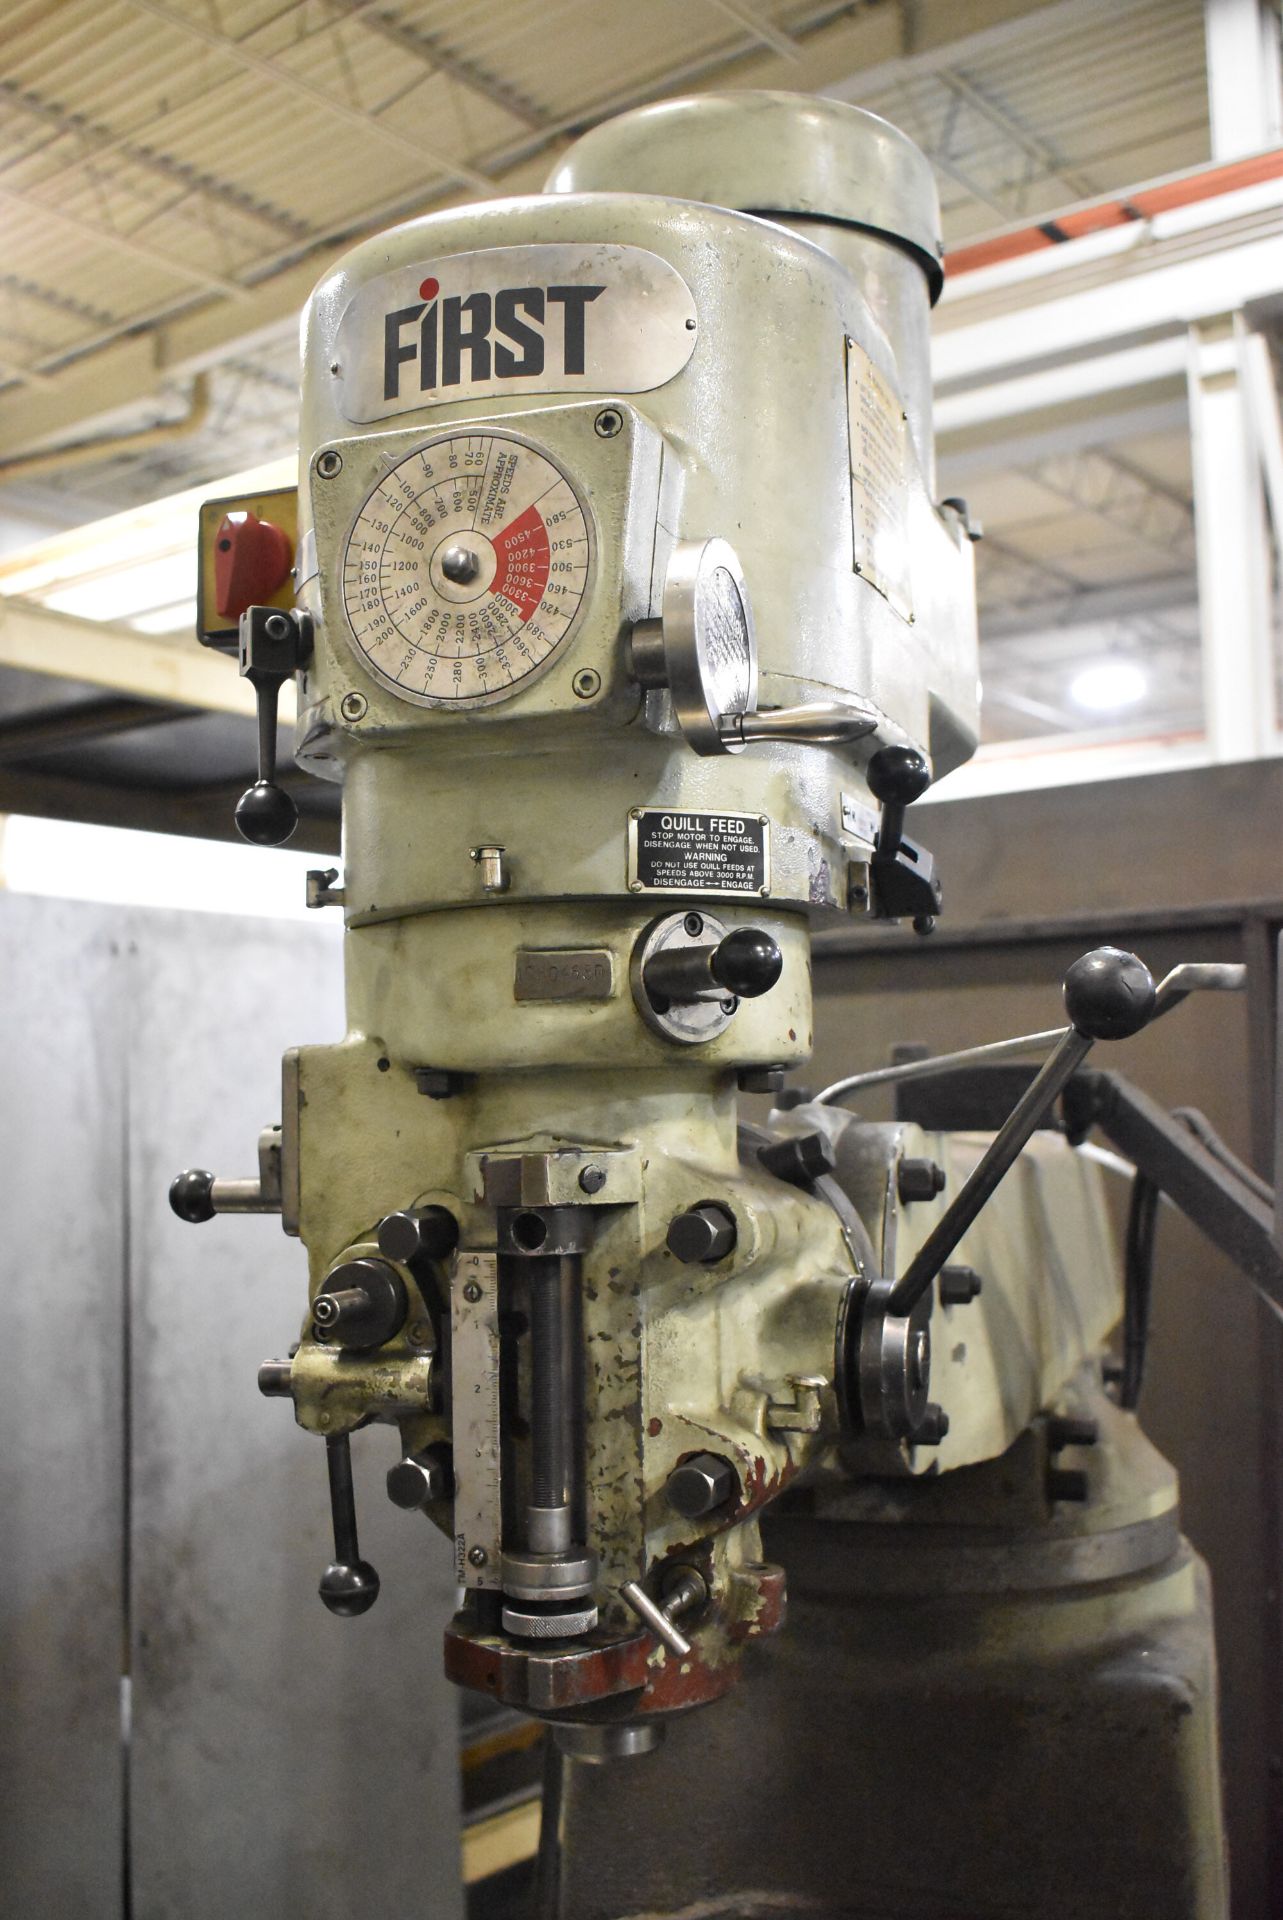 FIRST VERTICAL TURRET MILL WITH 10" X 50" T-SLOT TABLE, R8 SPINDLE TAPER, SPEEDS TO 4500 RPM, - Image 3 of 7